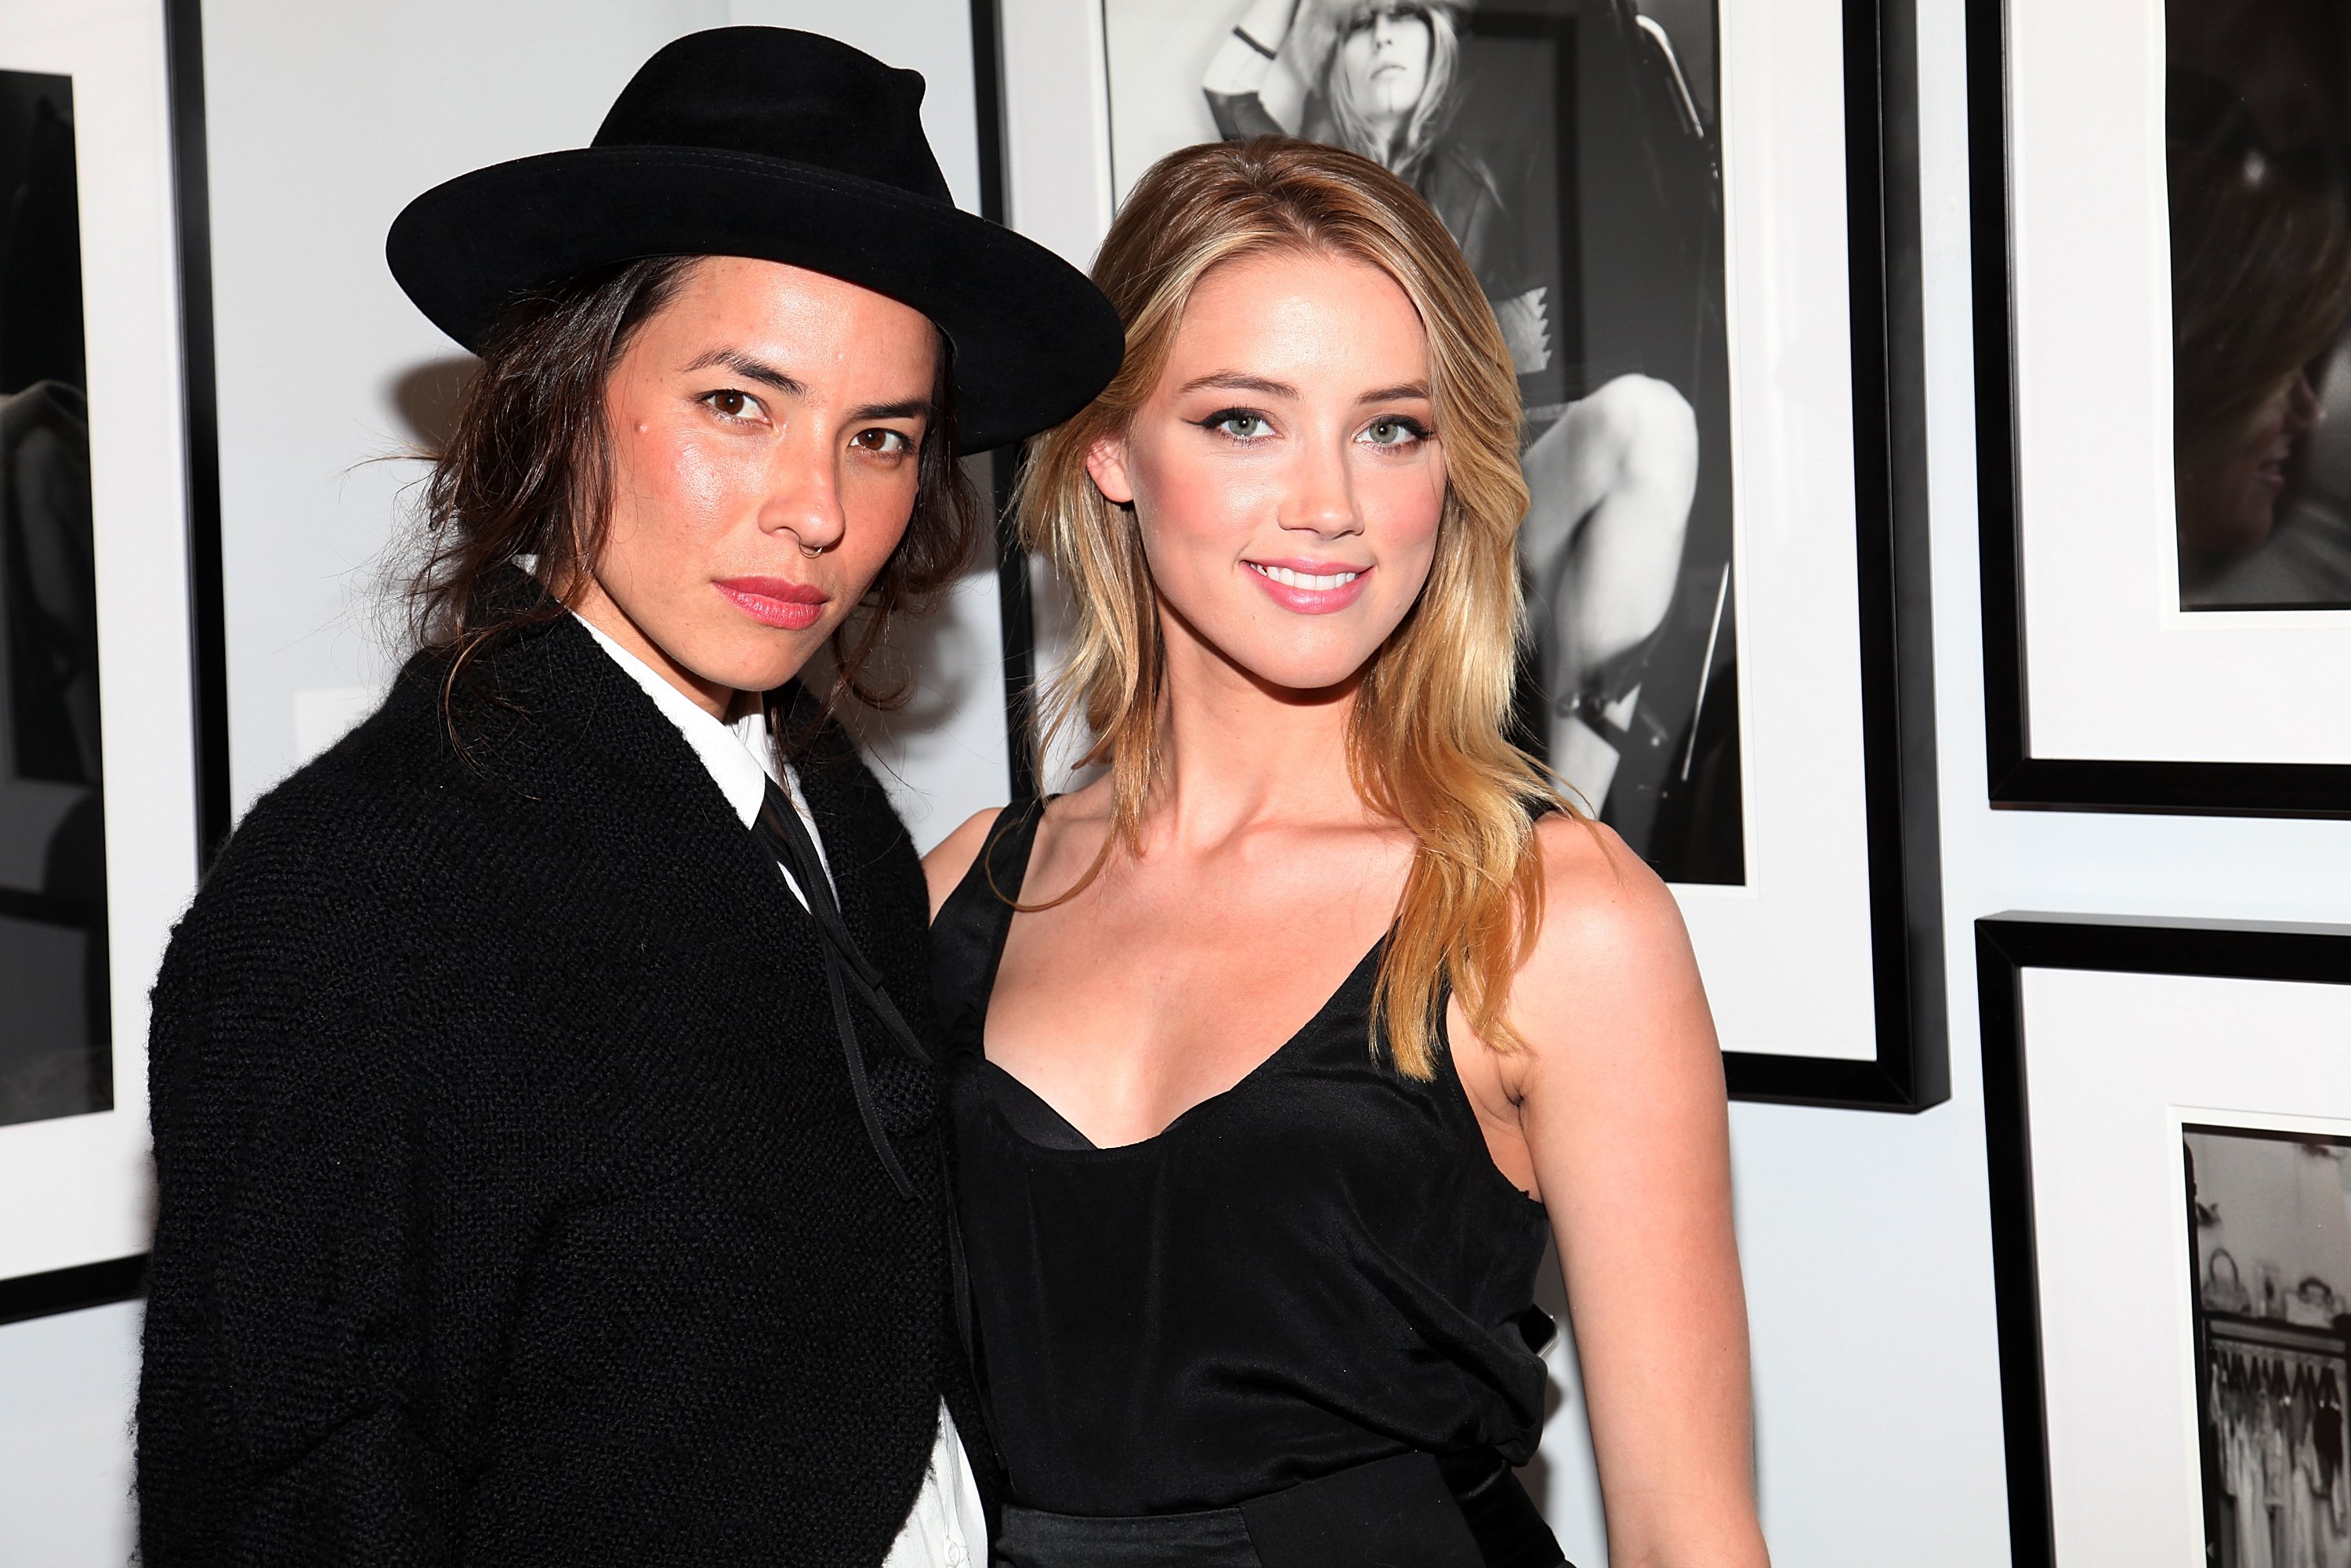  Tasya van Ree and Amber Heard attend 2011 Los Angeles Comikaze Expo kick-off party at the Celebrity Vault on December 15, 2010 in Beverly Hills, California. | Source: Getty Images